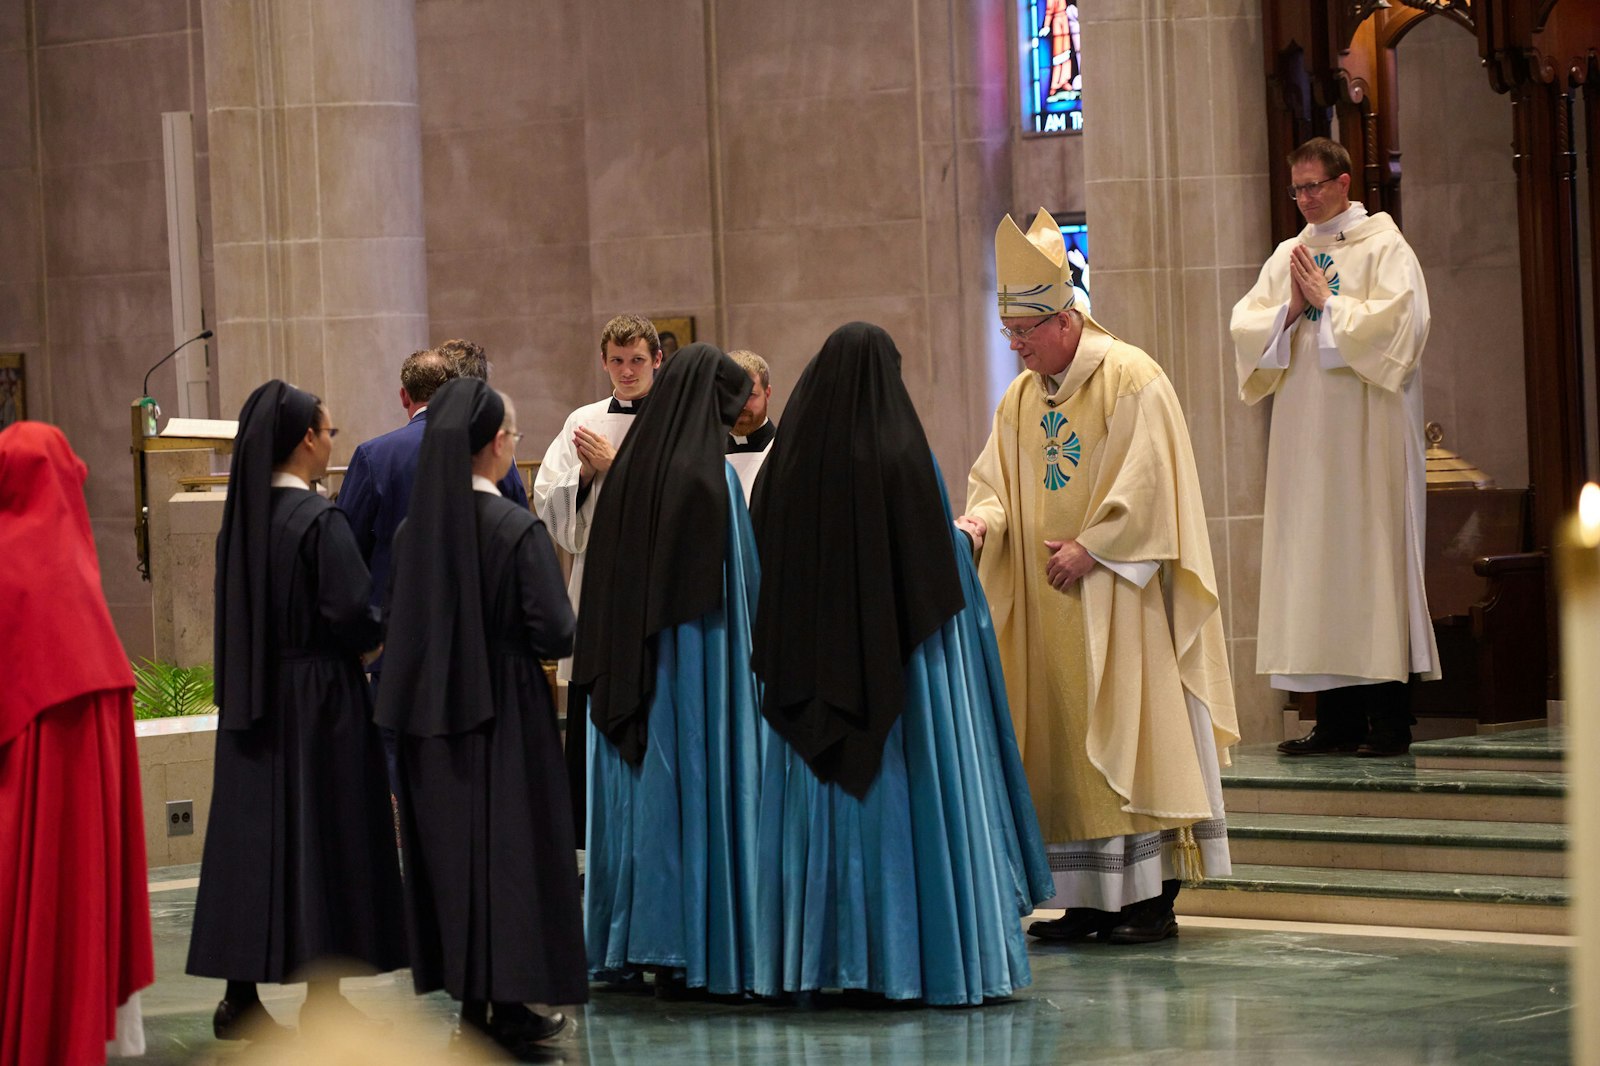 Bishop Battersby is greeted by representatives of the Diocese of La Crosse during the installation Mass.